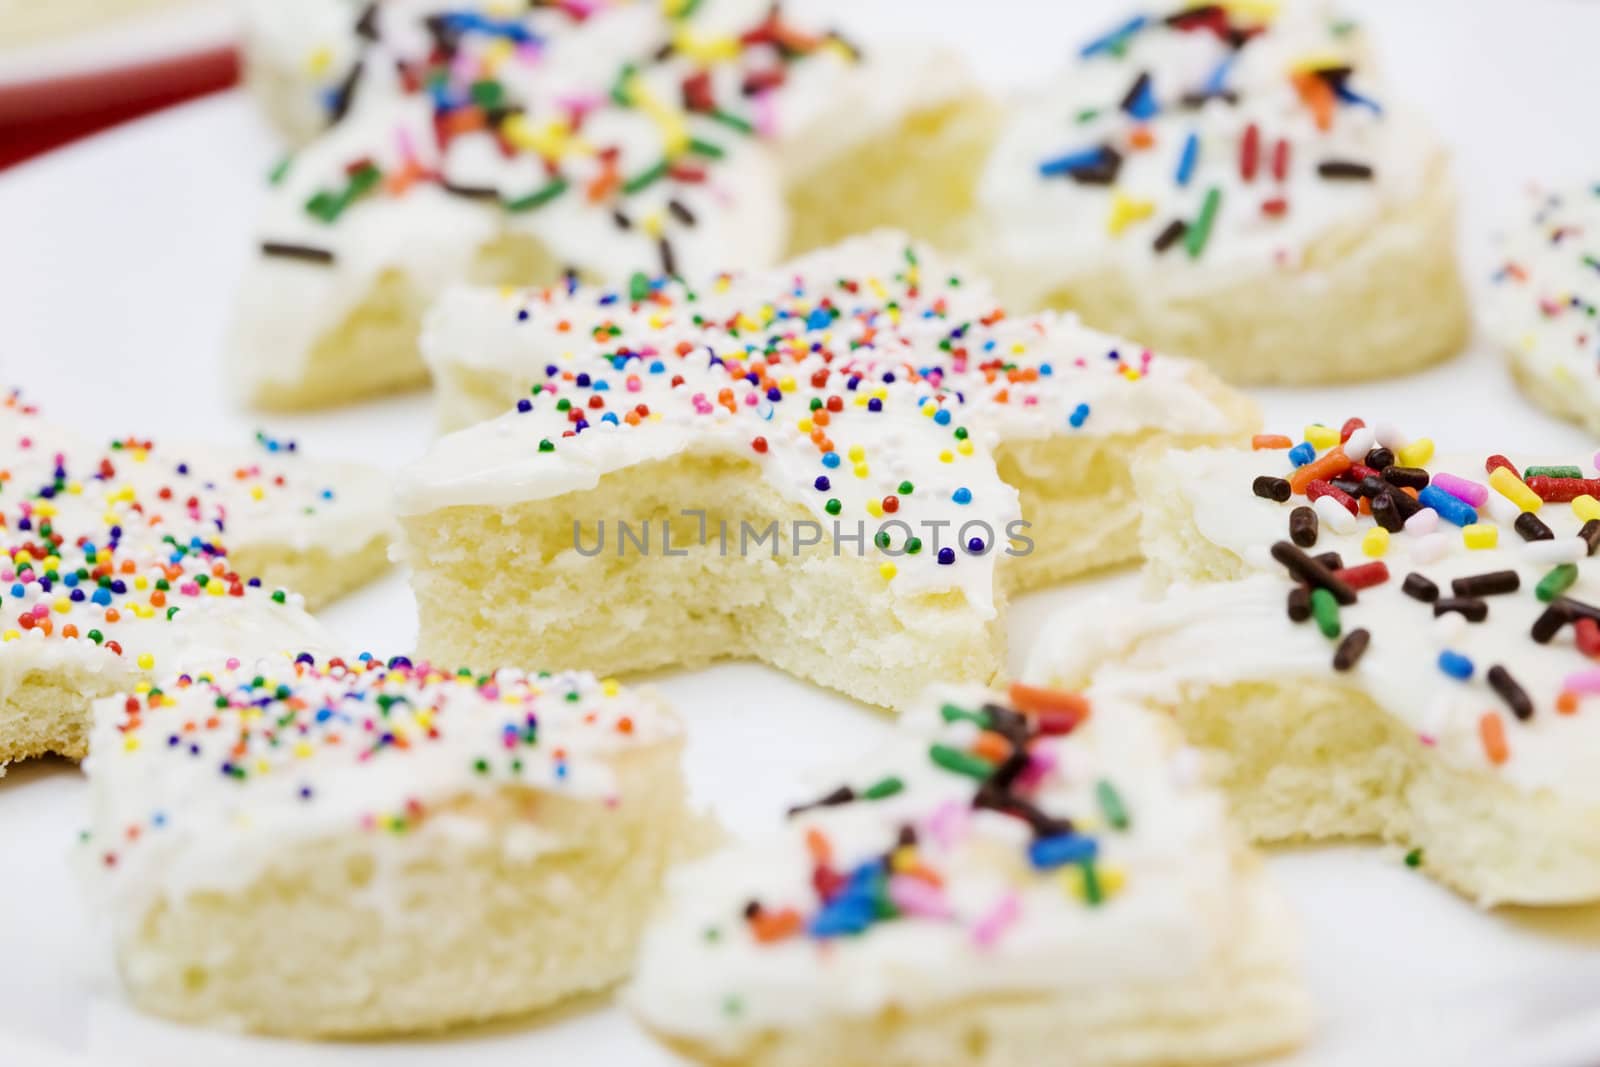 Frosted cake pieces with sprinkles, cut into star and heart shapes